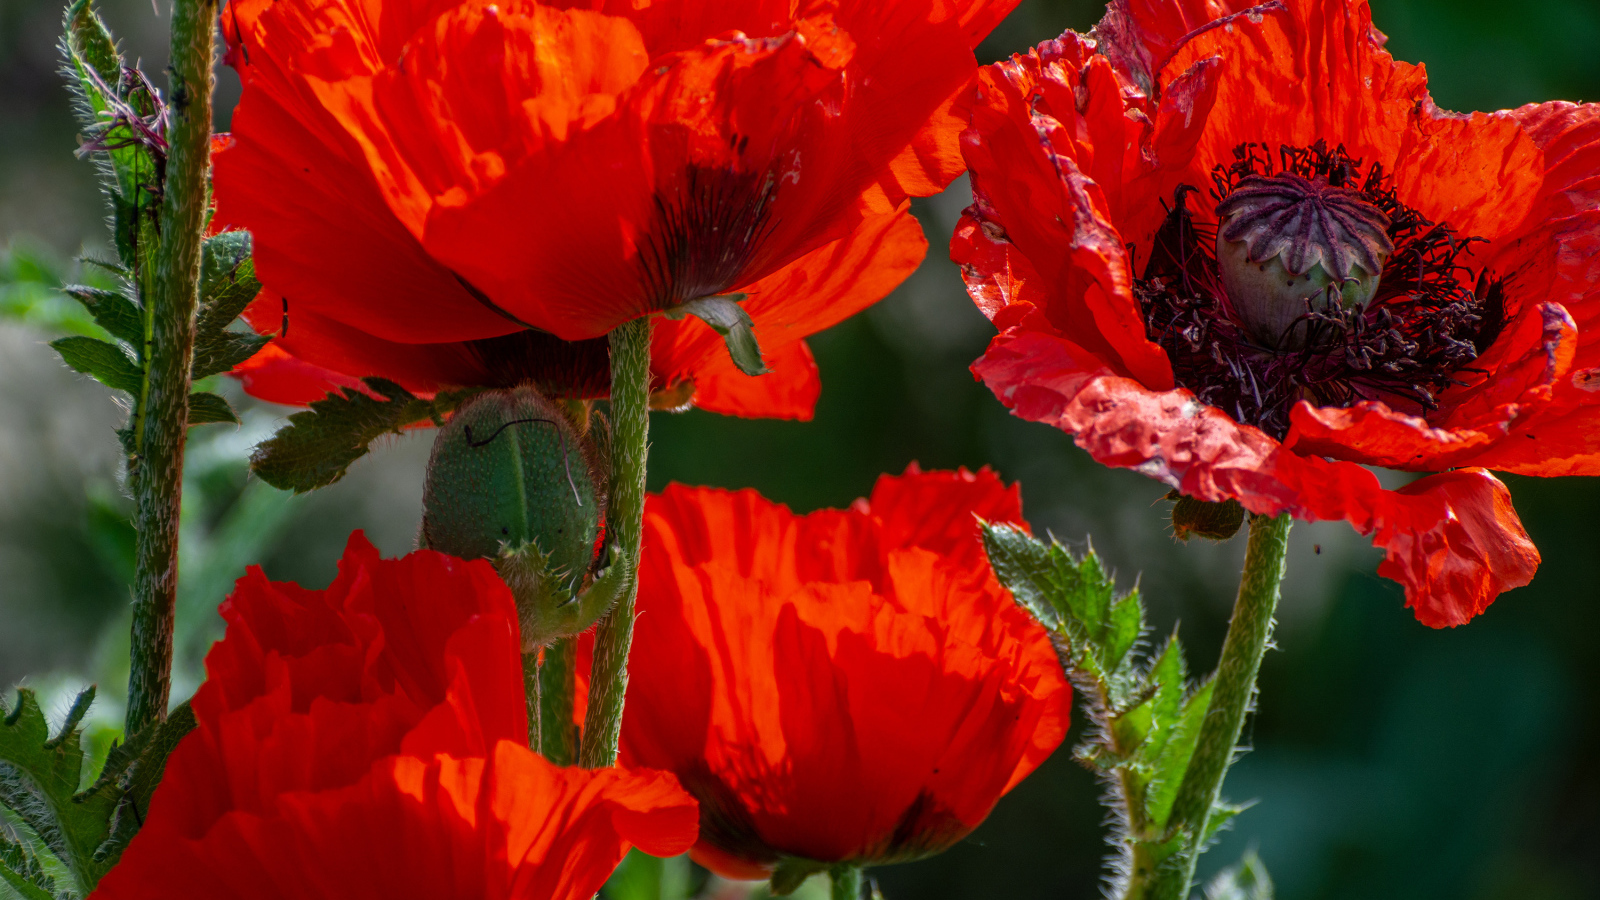 Big red poppies with buds in the sun